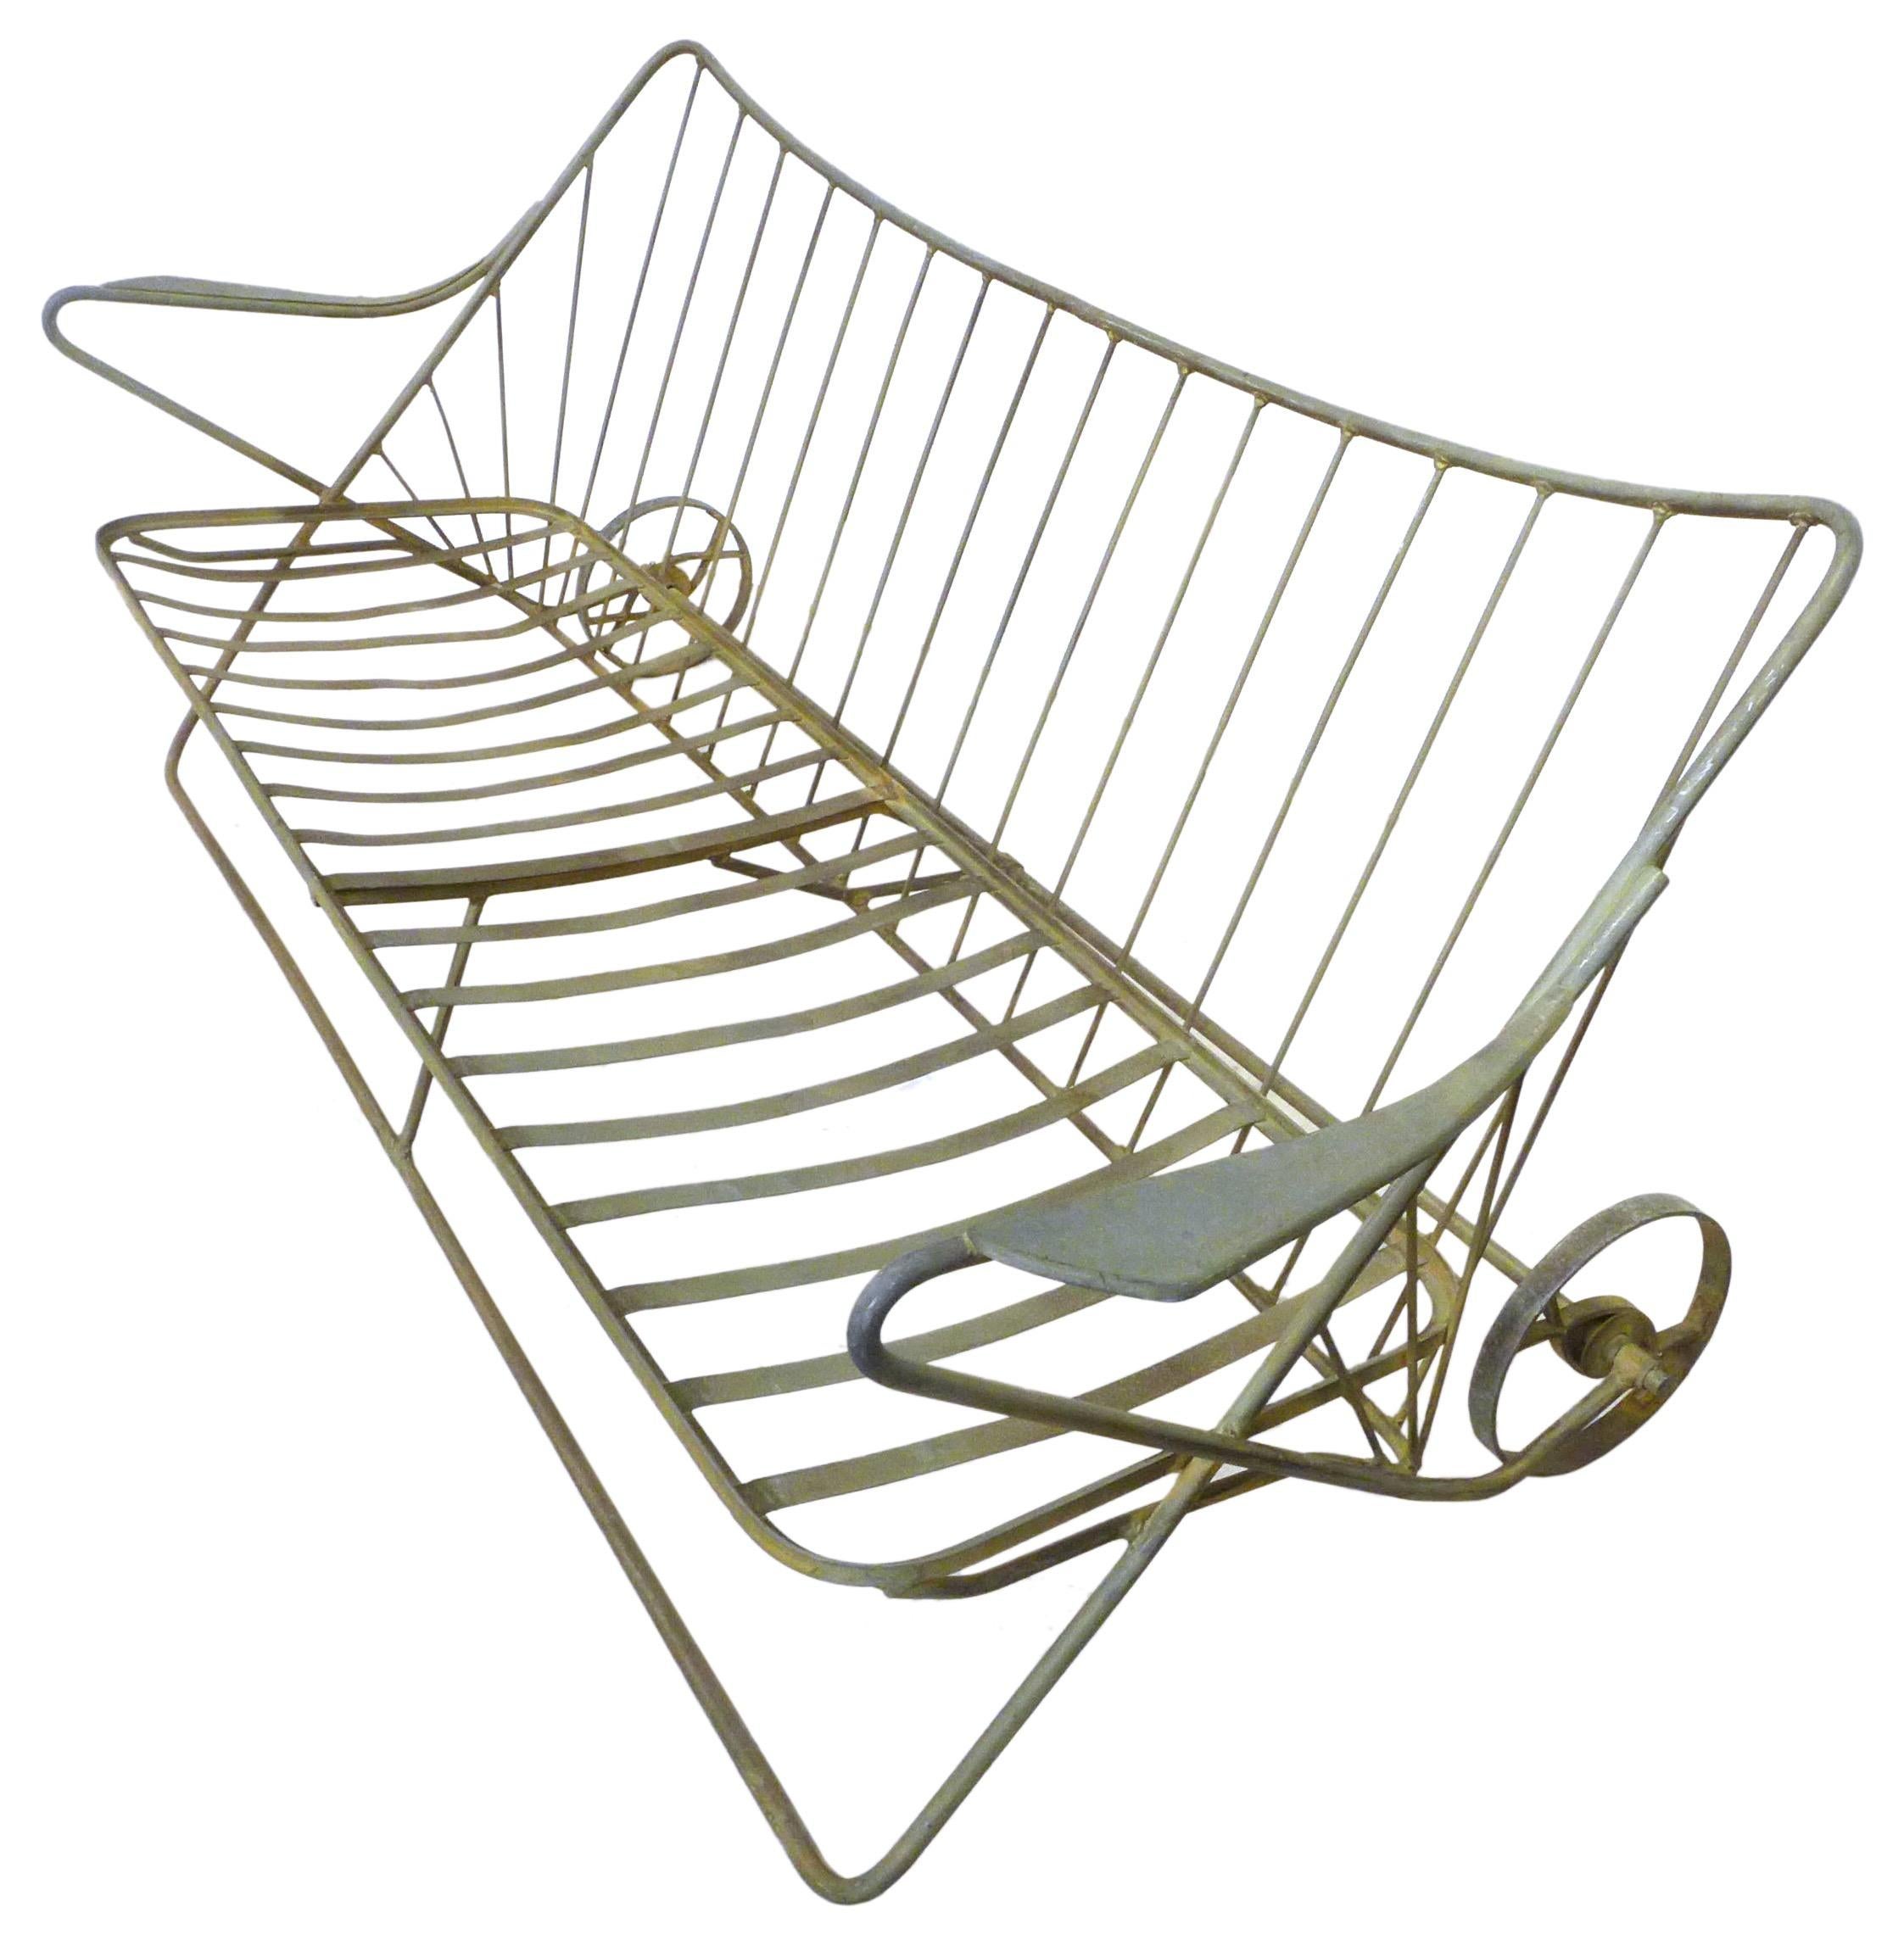 A wonderful, wrought iron, outdoor sofa frame by John Salterini. Quintessential Salterini spirit with elegant, swooping lines, great proportions and quality construction. Original rear wheels add a nice detail and ease of mobility. A much-desired,